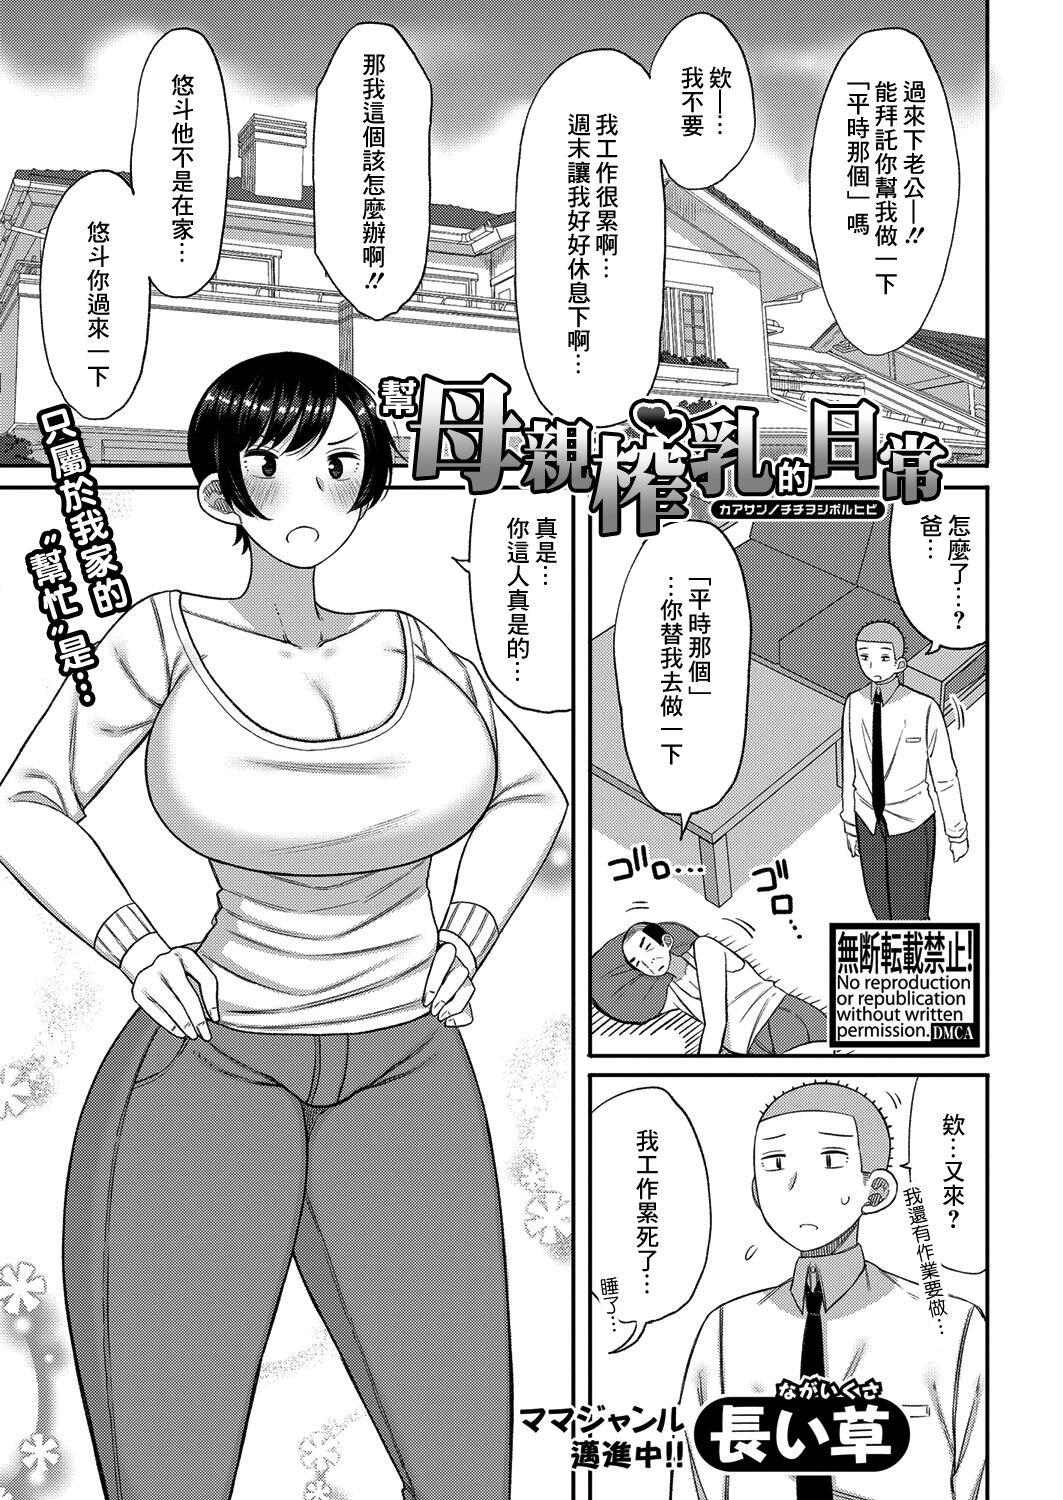 Babes 母さんの乳を榨る日々 Tan - Picture 1